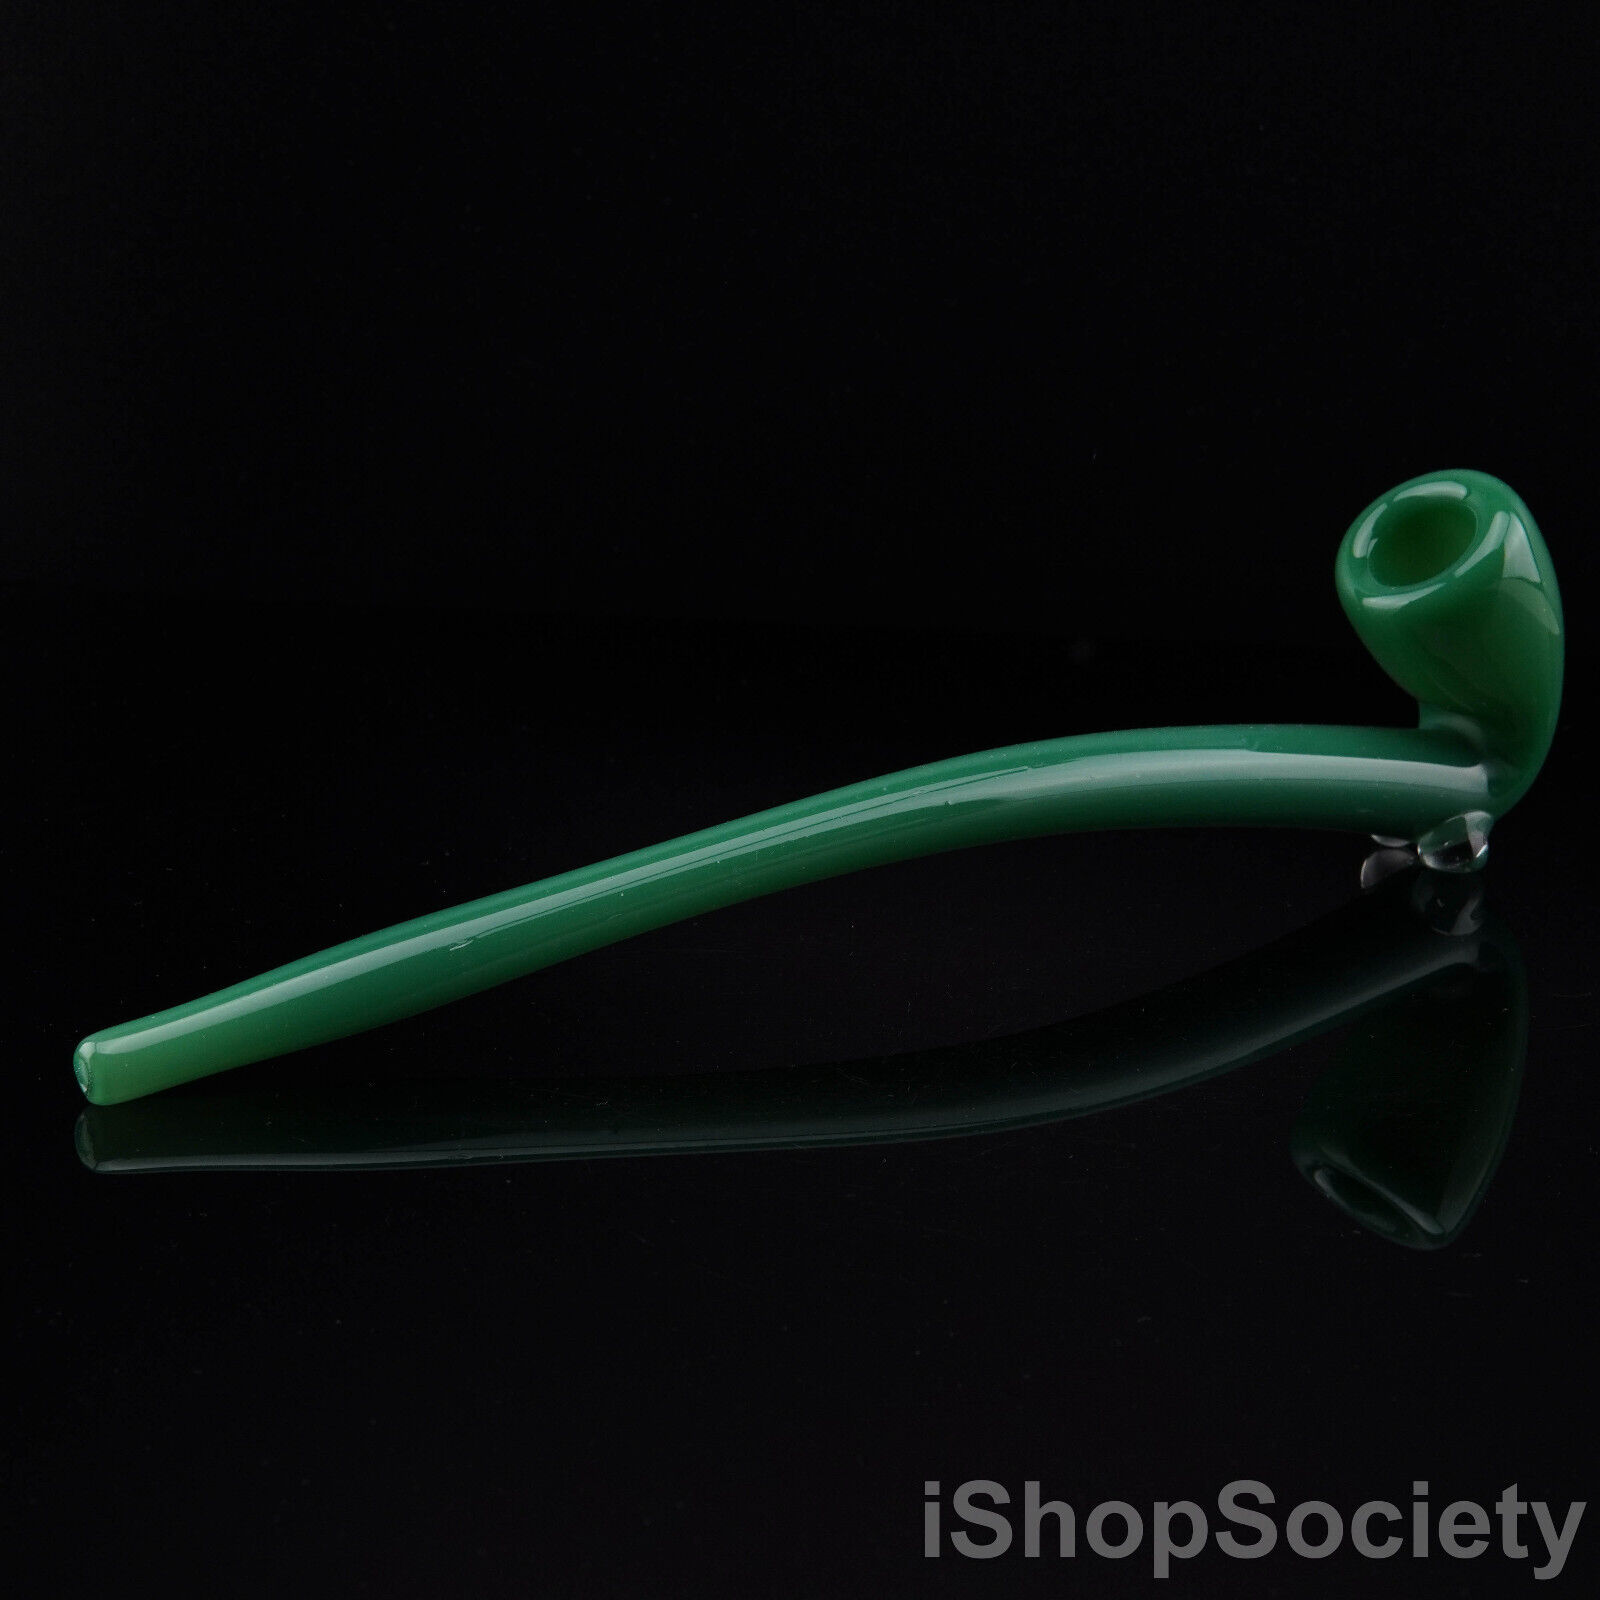 12 Long Gandalf Sherlock Tobacco Smoking Pipe Thick Collectible Pipes - P683C. Available Now for 24.99